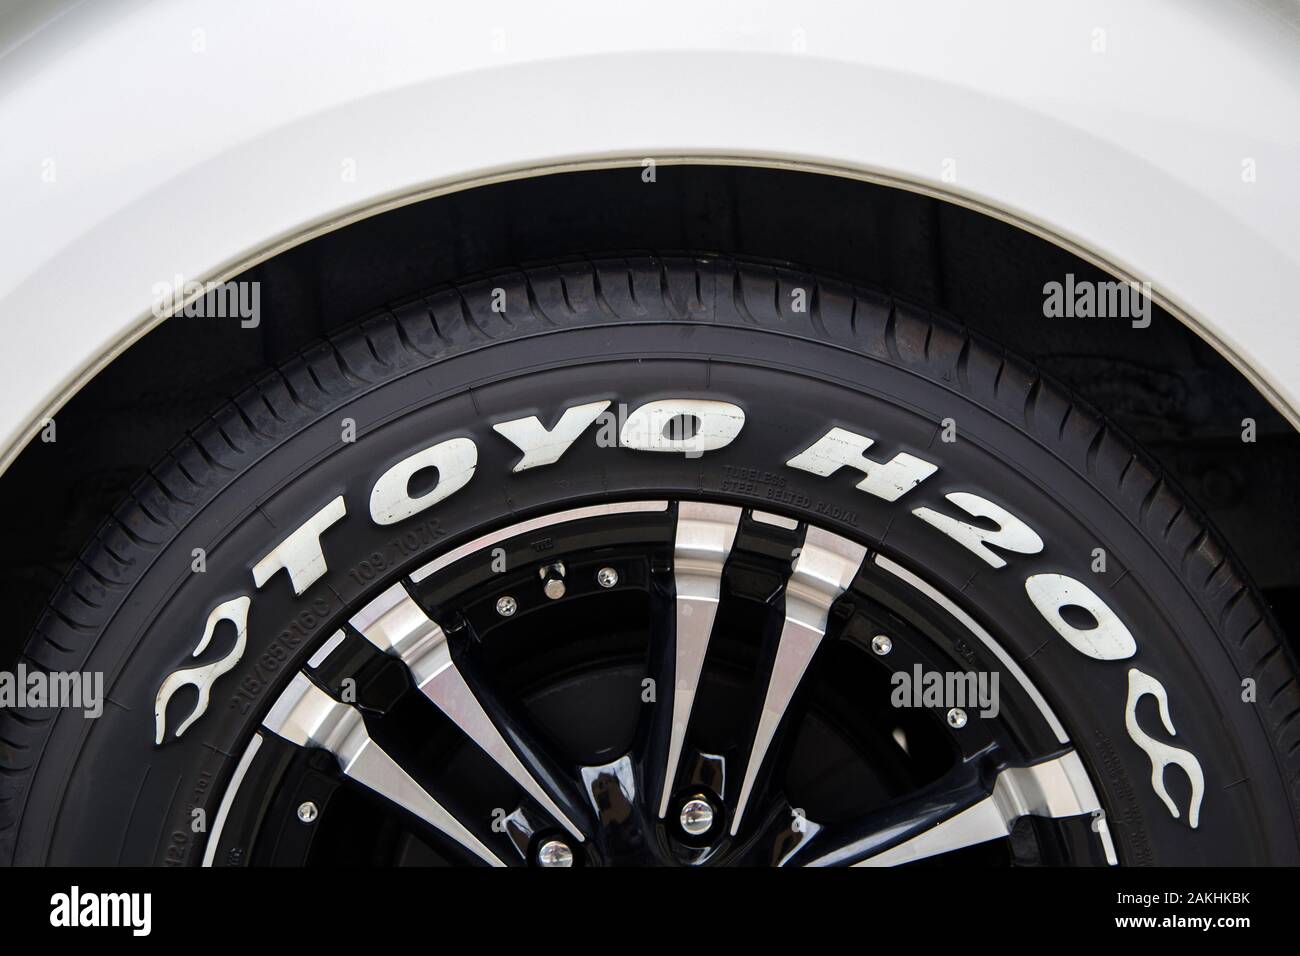 KYOTO, JAPAN - OCTOBER 11, 2016: Detail of Toyo H20 tyre on a car in Kyoto, Japan. Toyo tires are manufactured in Japanese Toyo Tire Corporation, foun Stock Photo